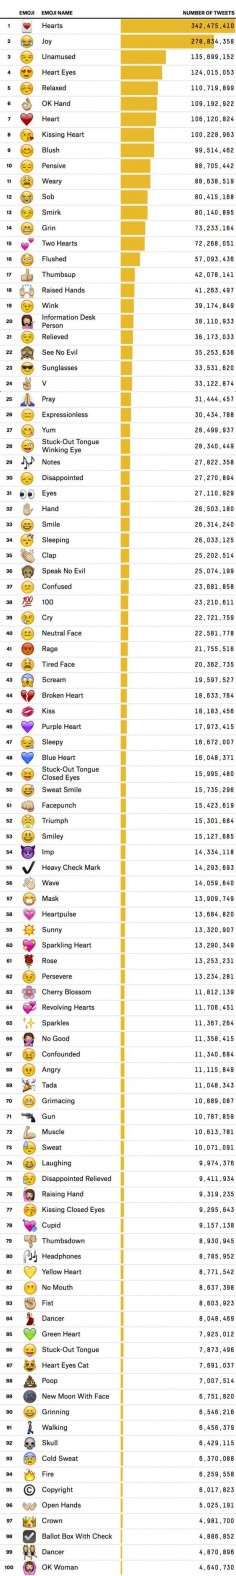 The 100 Most Used #Emoji on #Twitter #Social